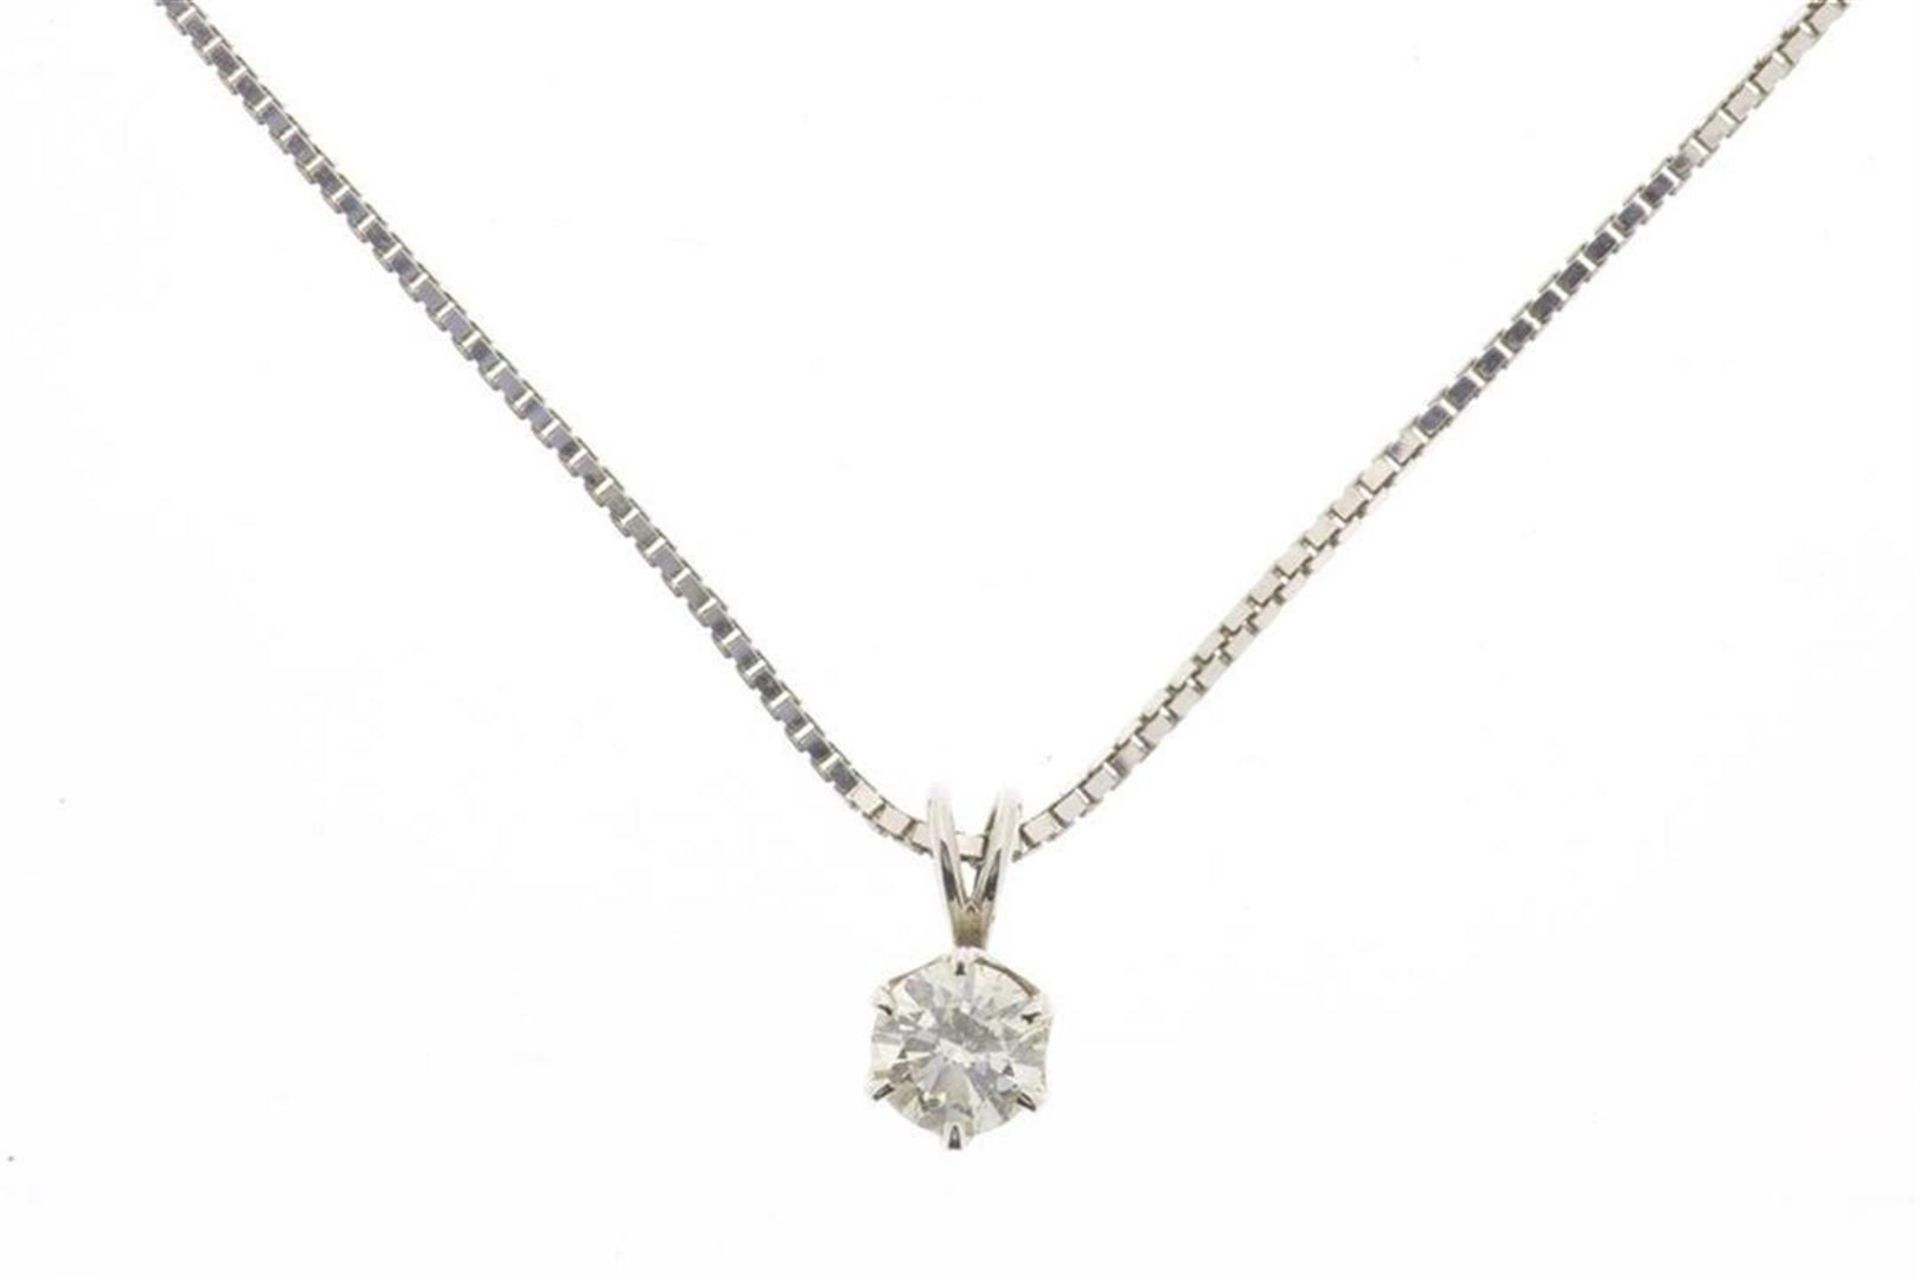 White gold necklace with a pendant